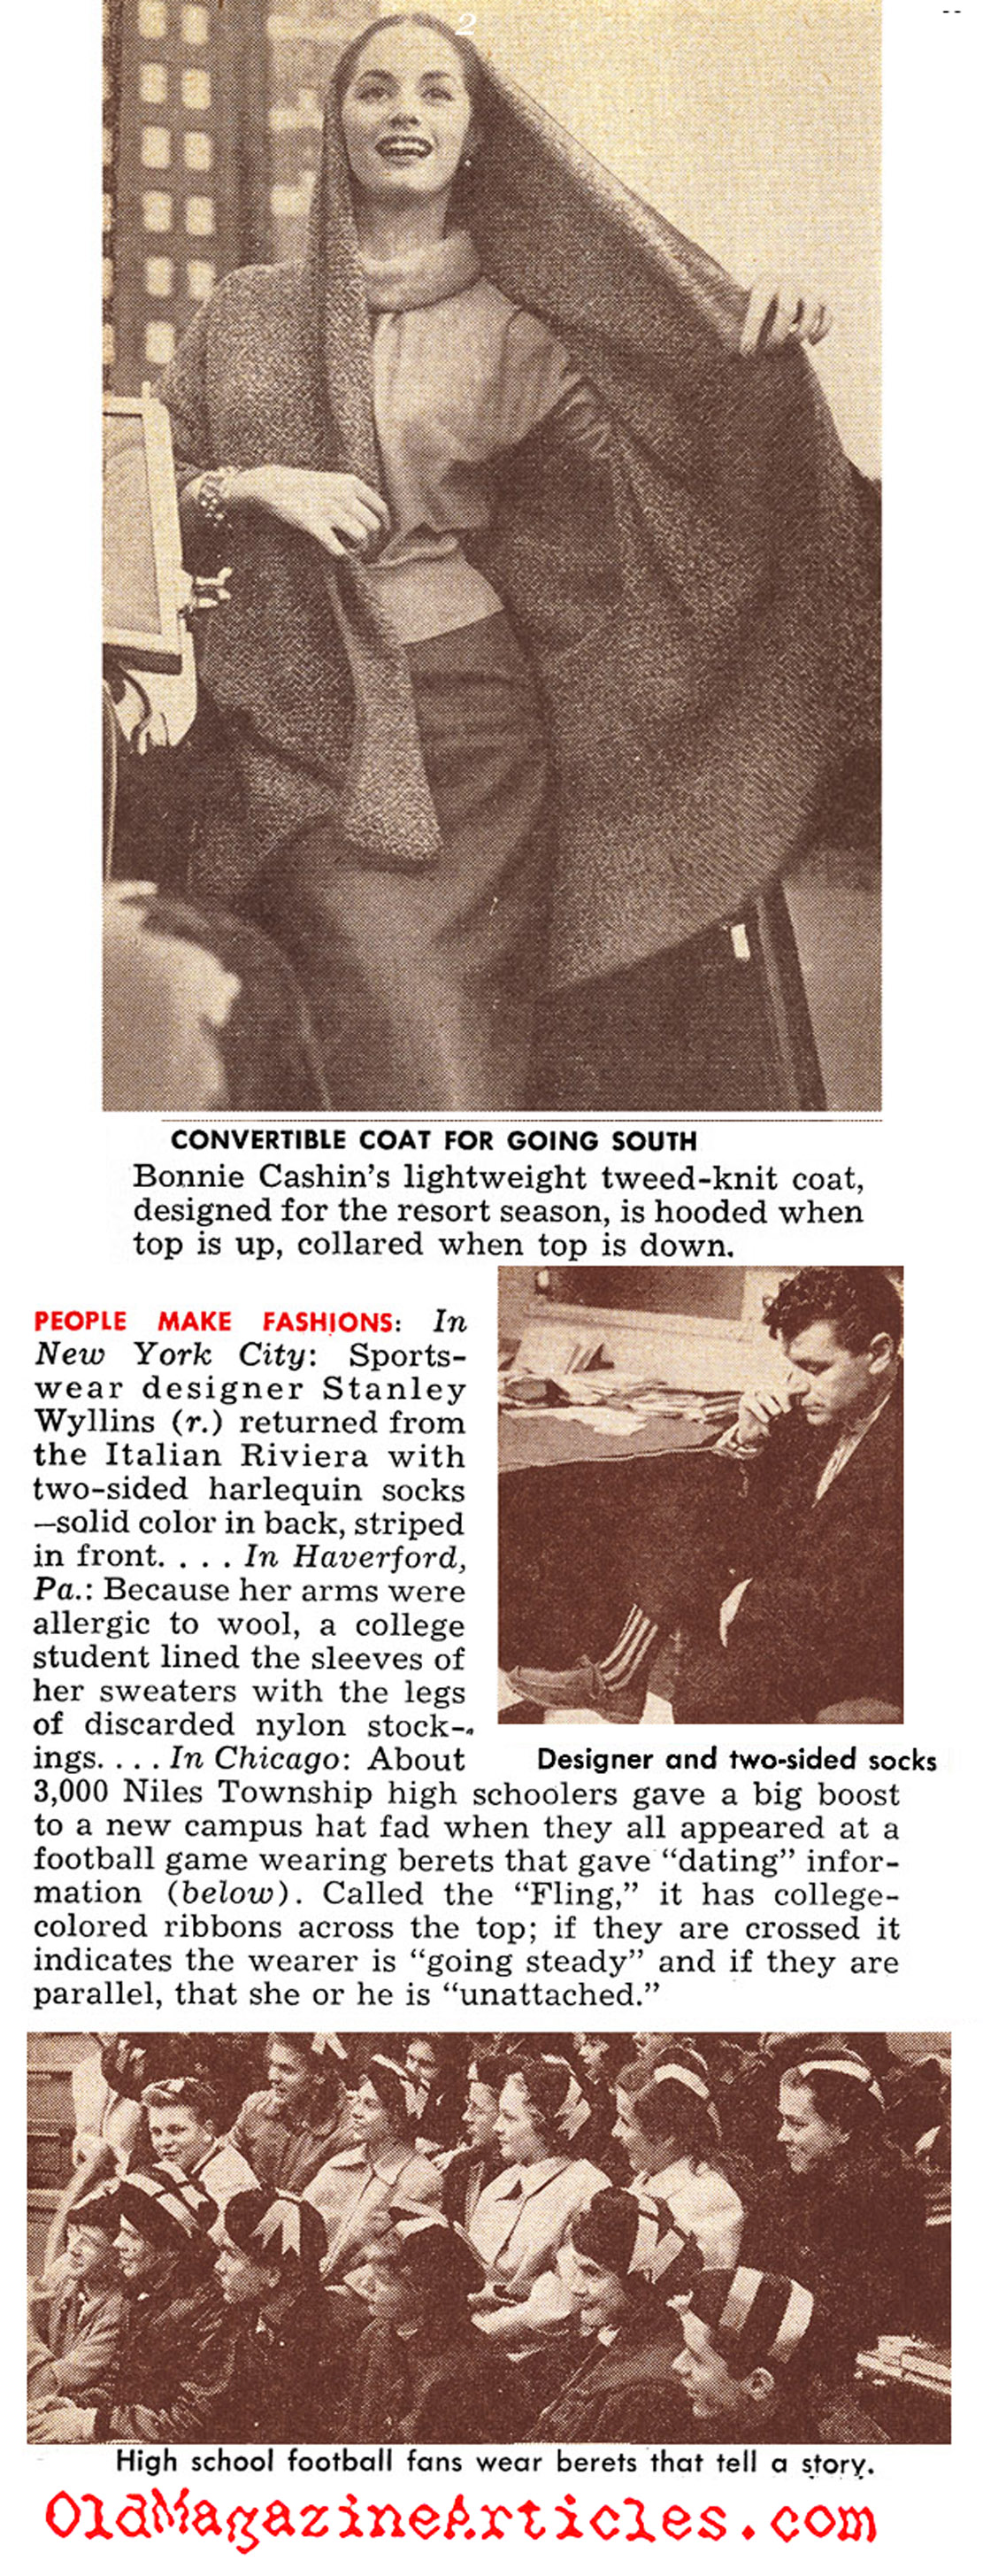 Swank in the Cold (Quick Magazine, 1952)